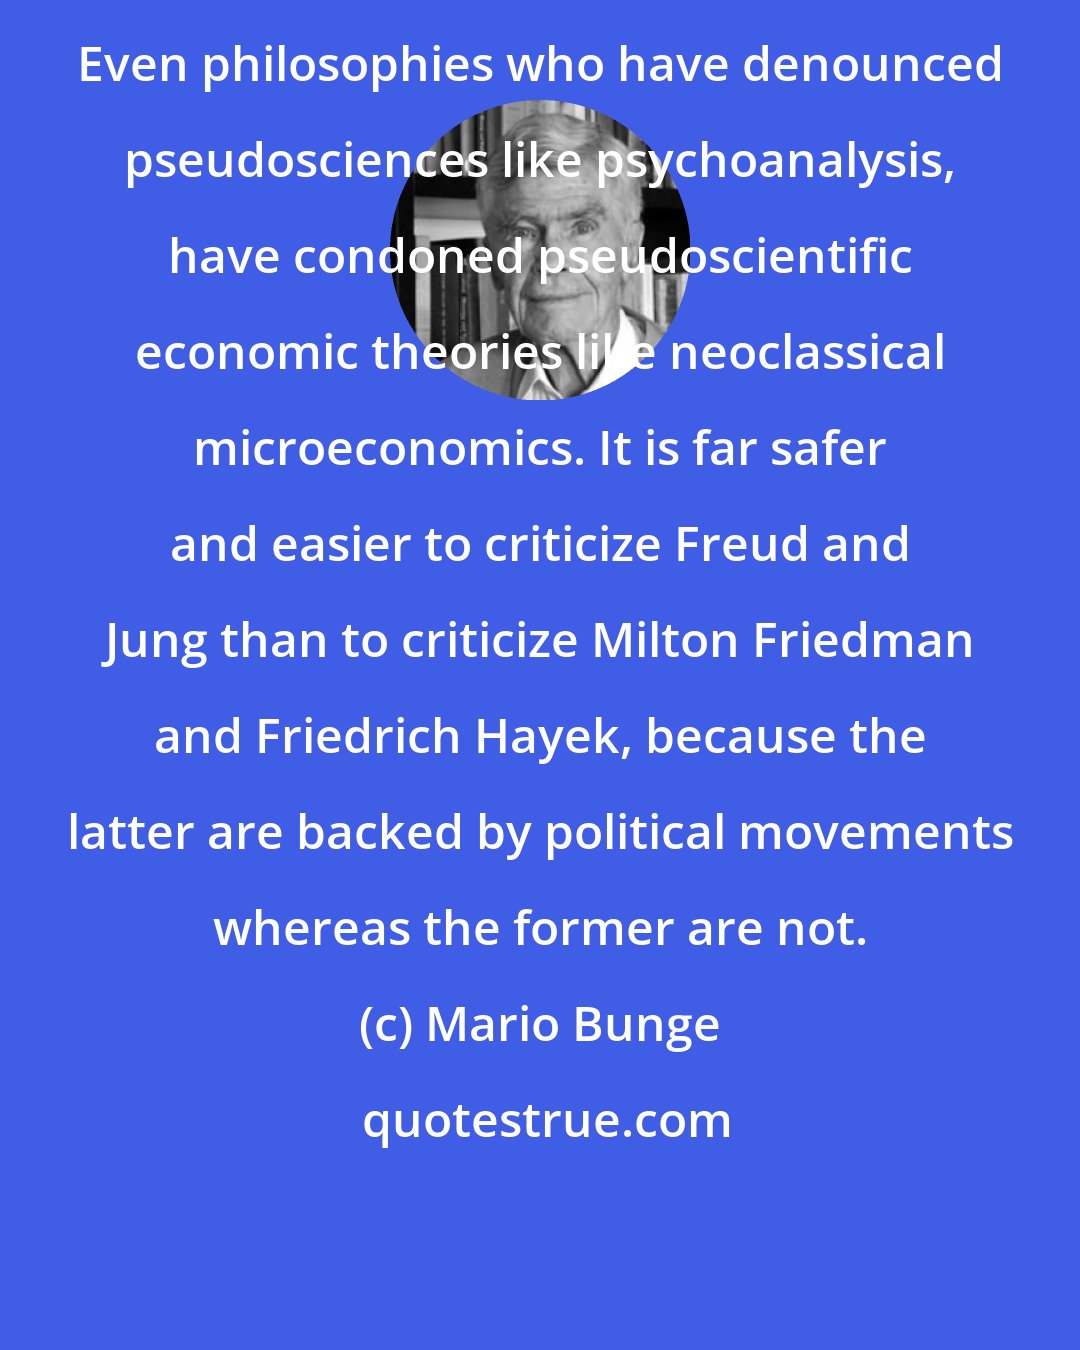 Mario Bunge: Even philosophies who have denounced pseudosciences like psychoanalysis, have condoned pseudoscientific economic theories like neoclassical microeconomics. It is far safer and easier to criticize Freud and Jung than to criticize Milton Friedman and Friedrich Hayek, because the latter are backed by political movements whereas the former are not.